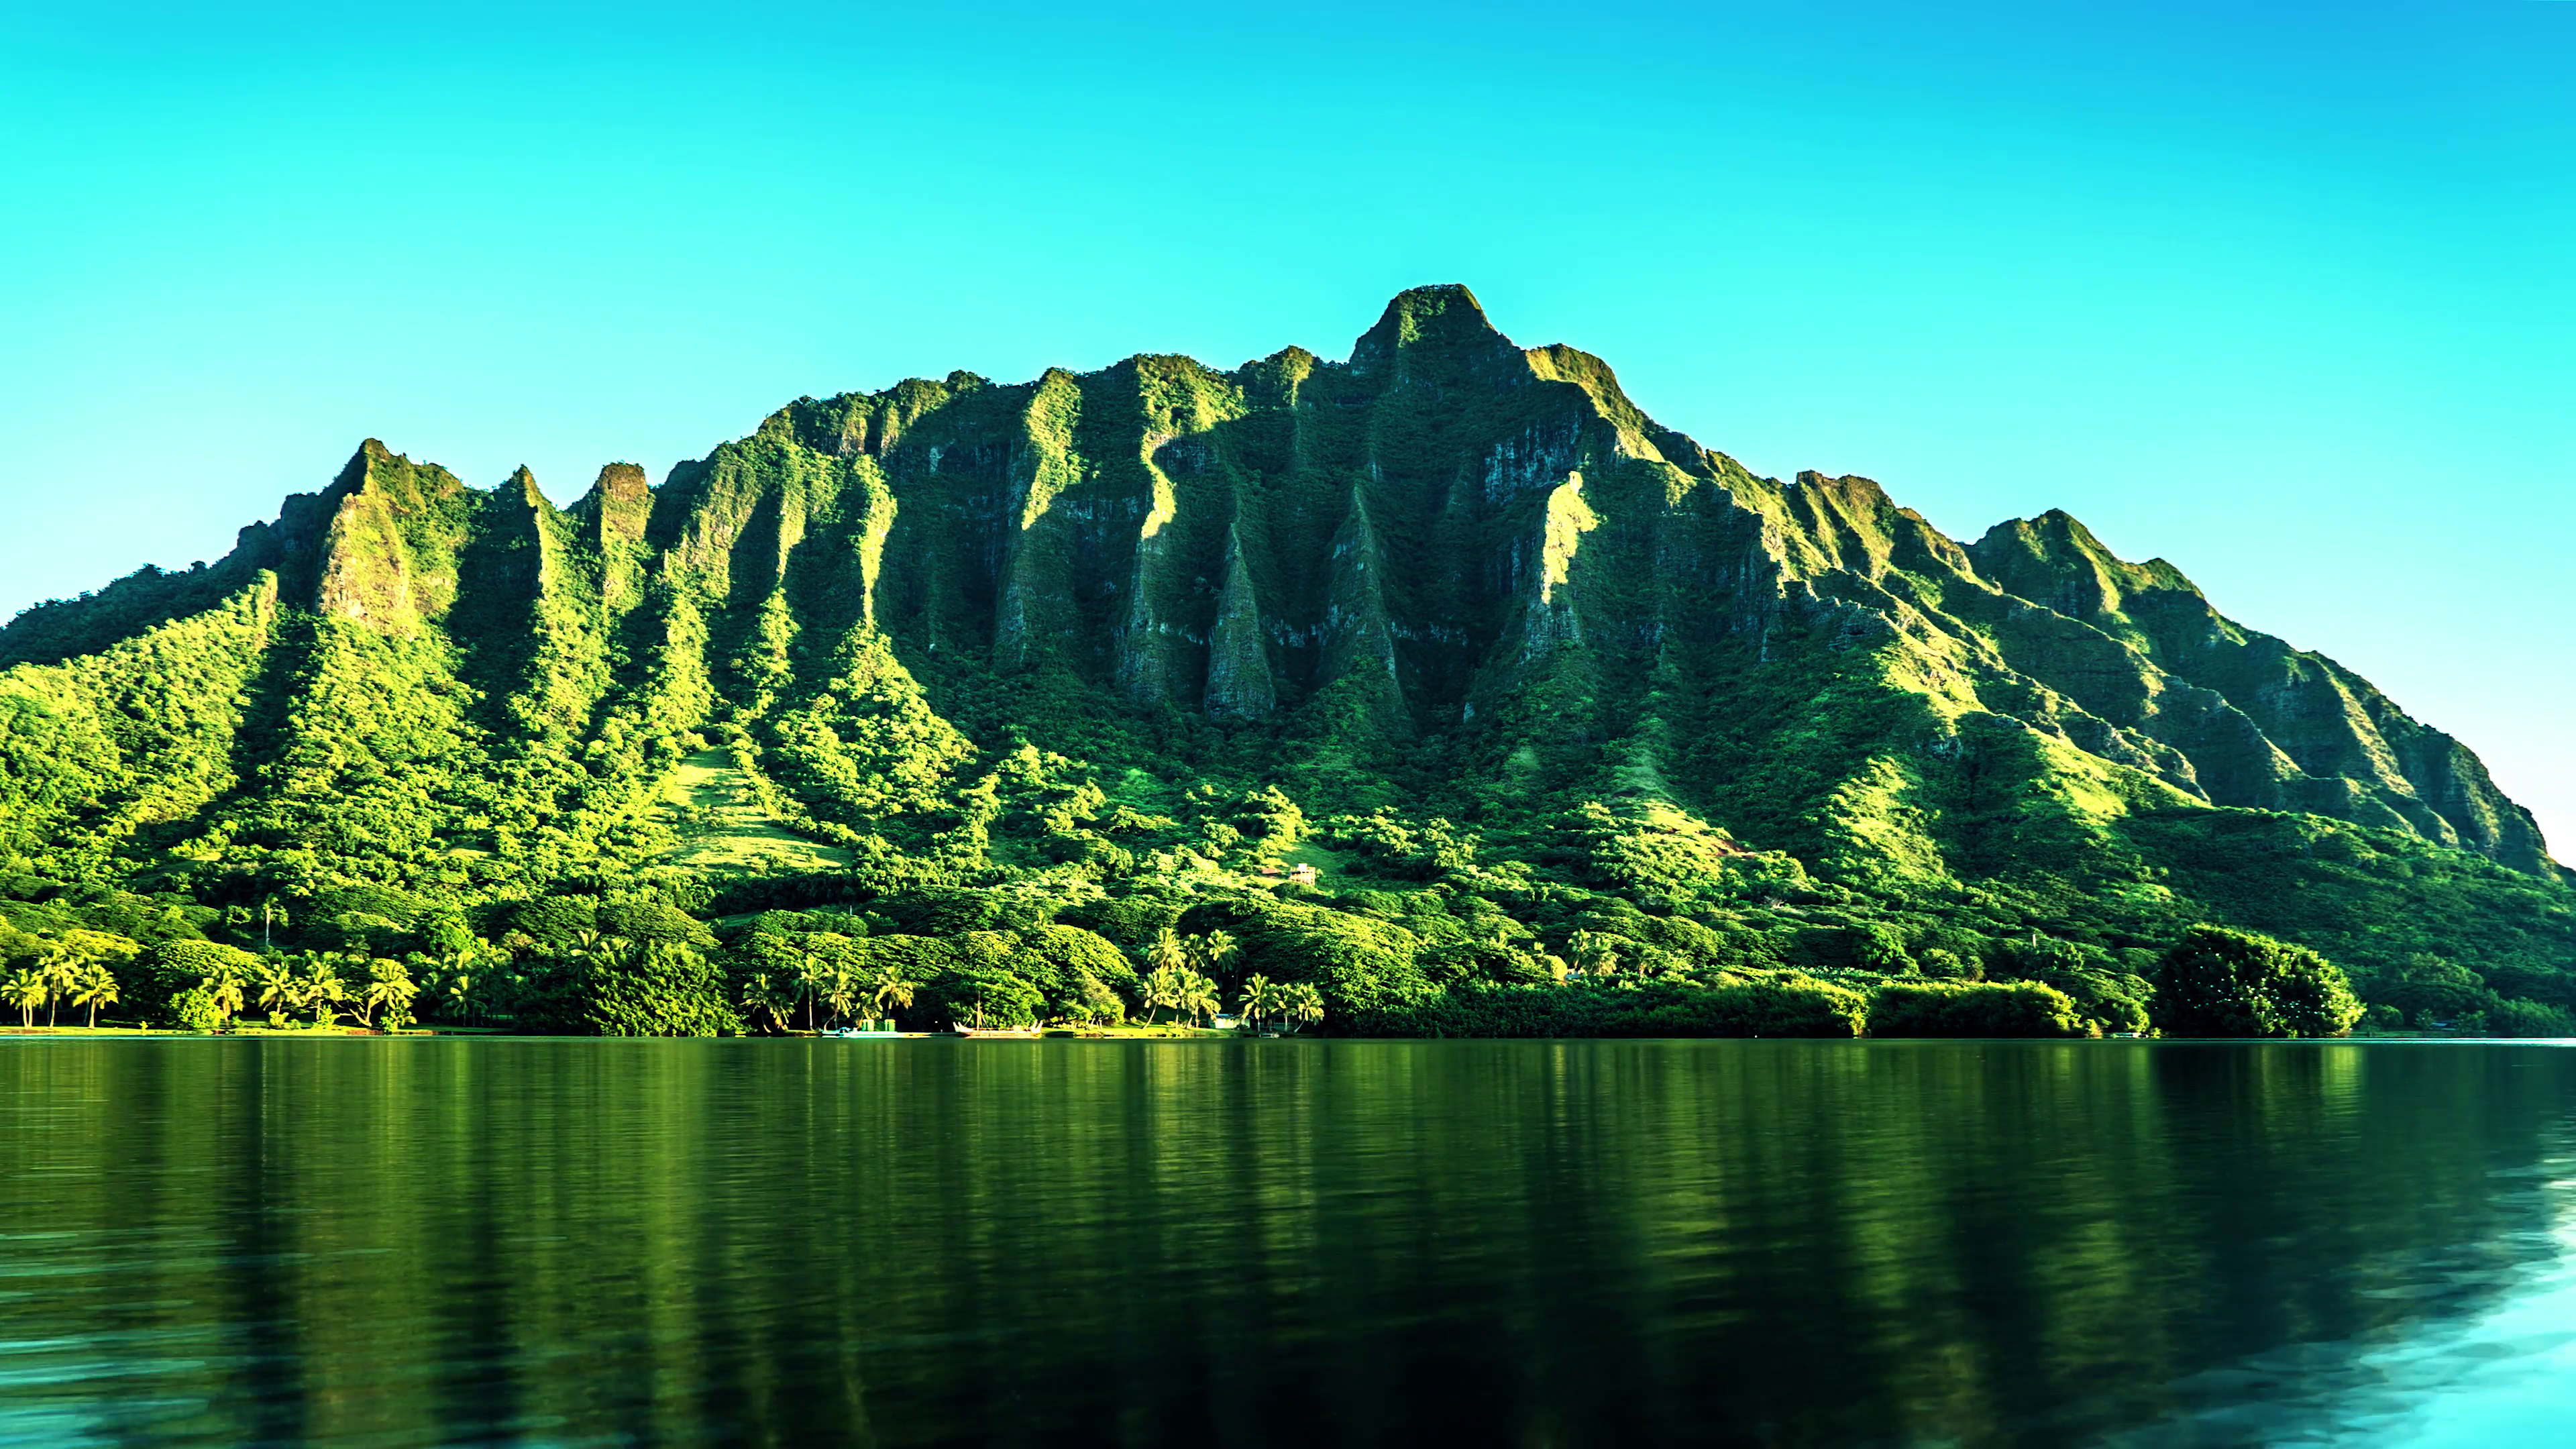 Sunrise over Steep Tropical Mountains on Calm Lake in Hawai'i in 4K ...